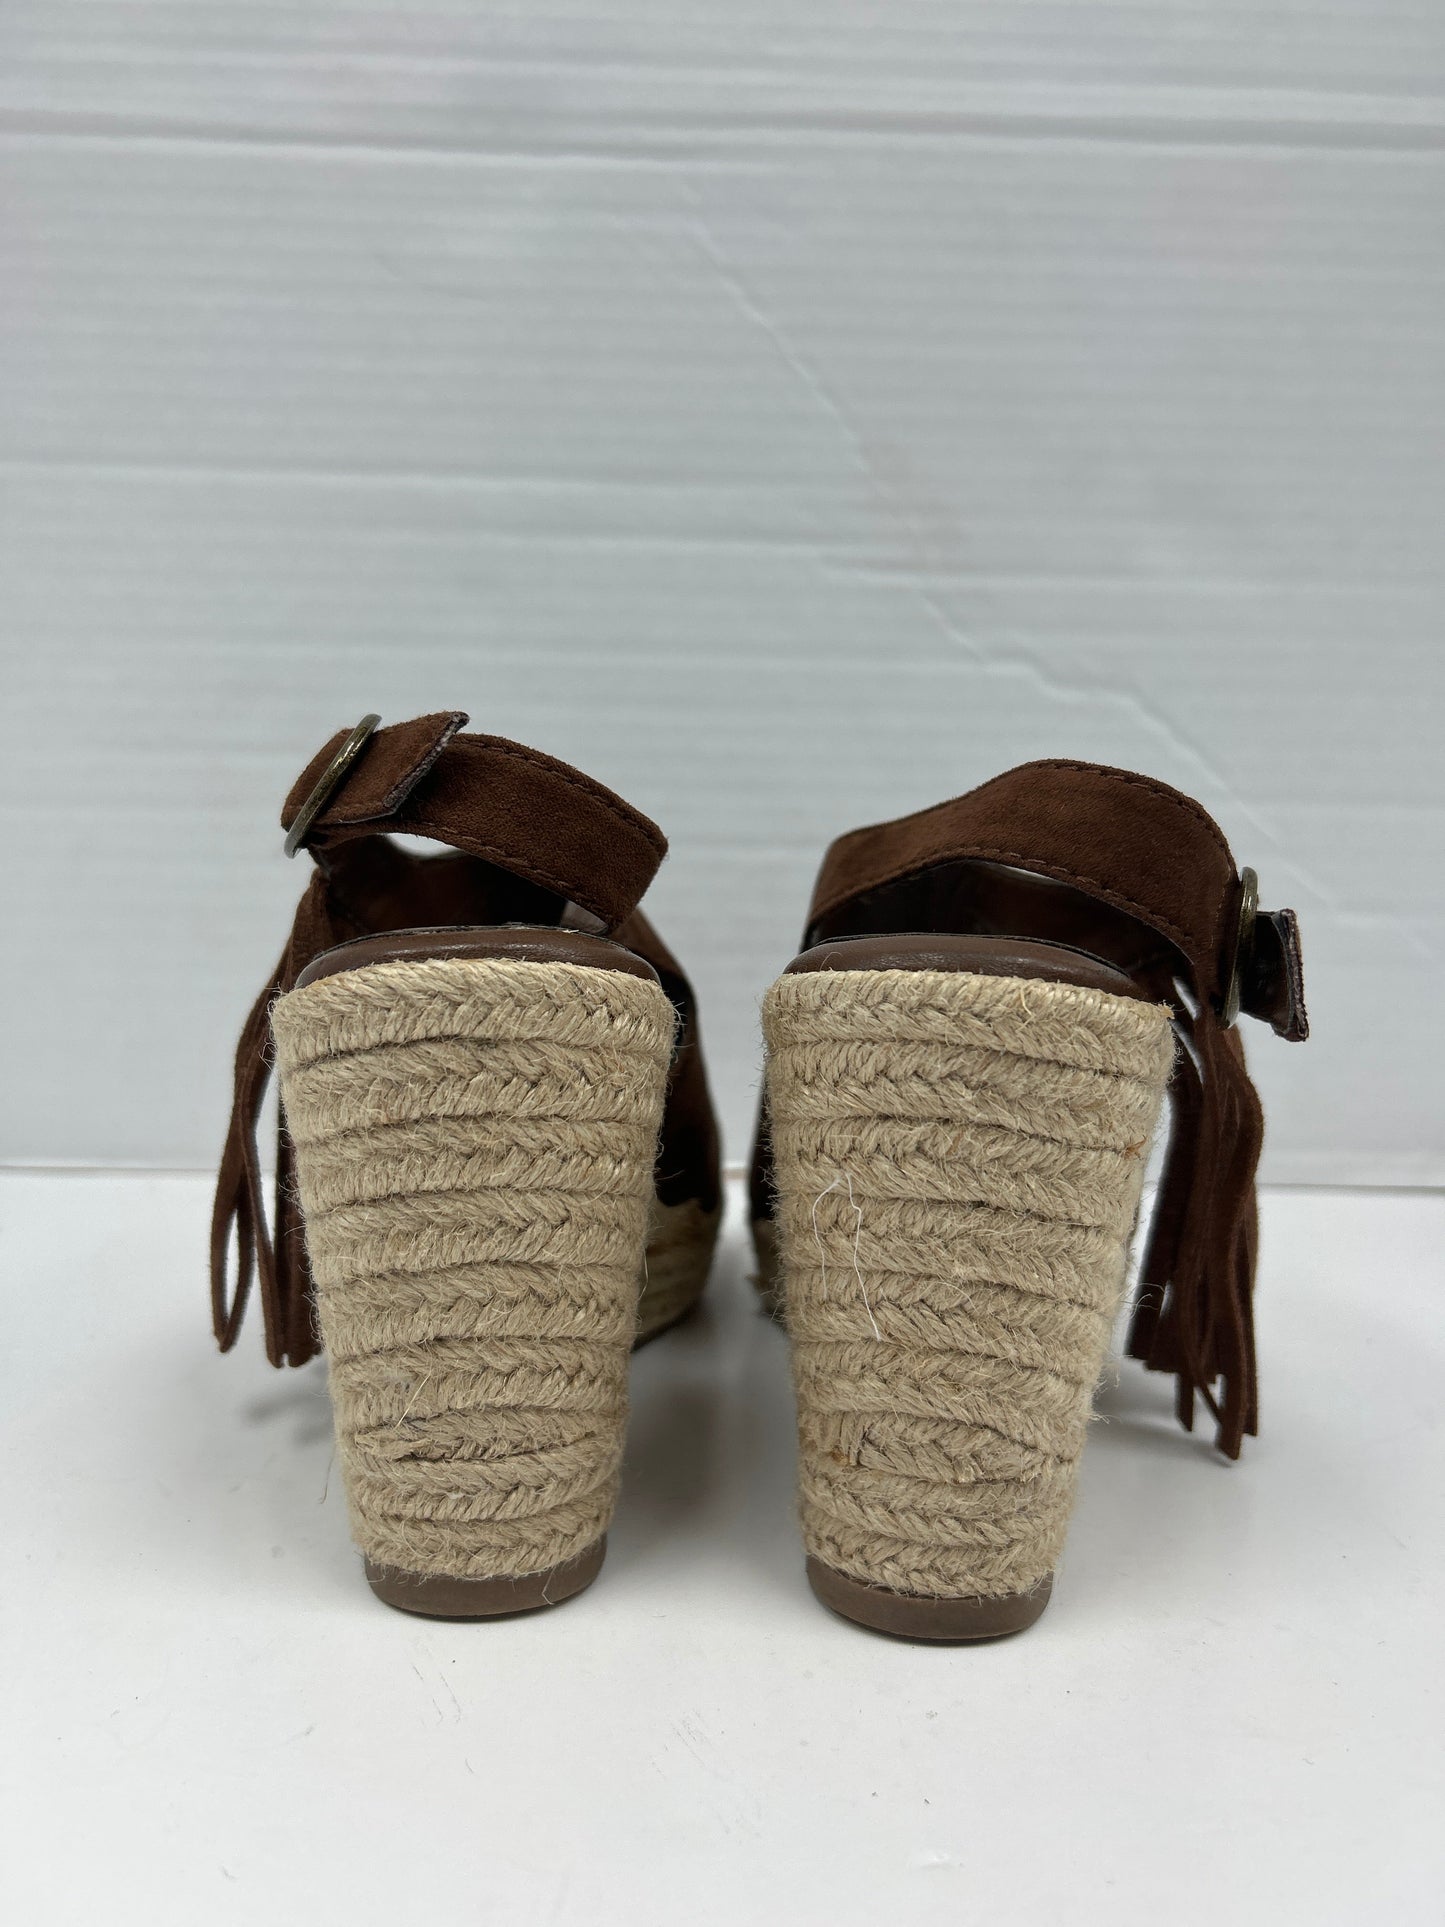 Shoes Heels Block By American Eagle  Size: 6